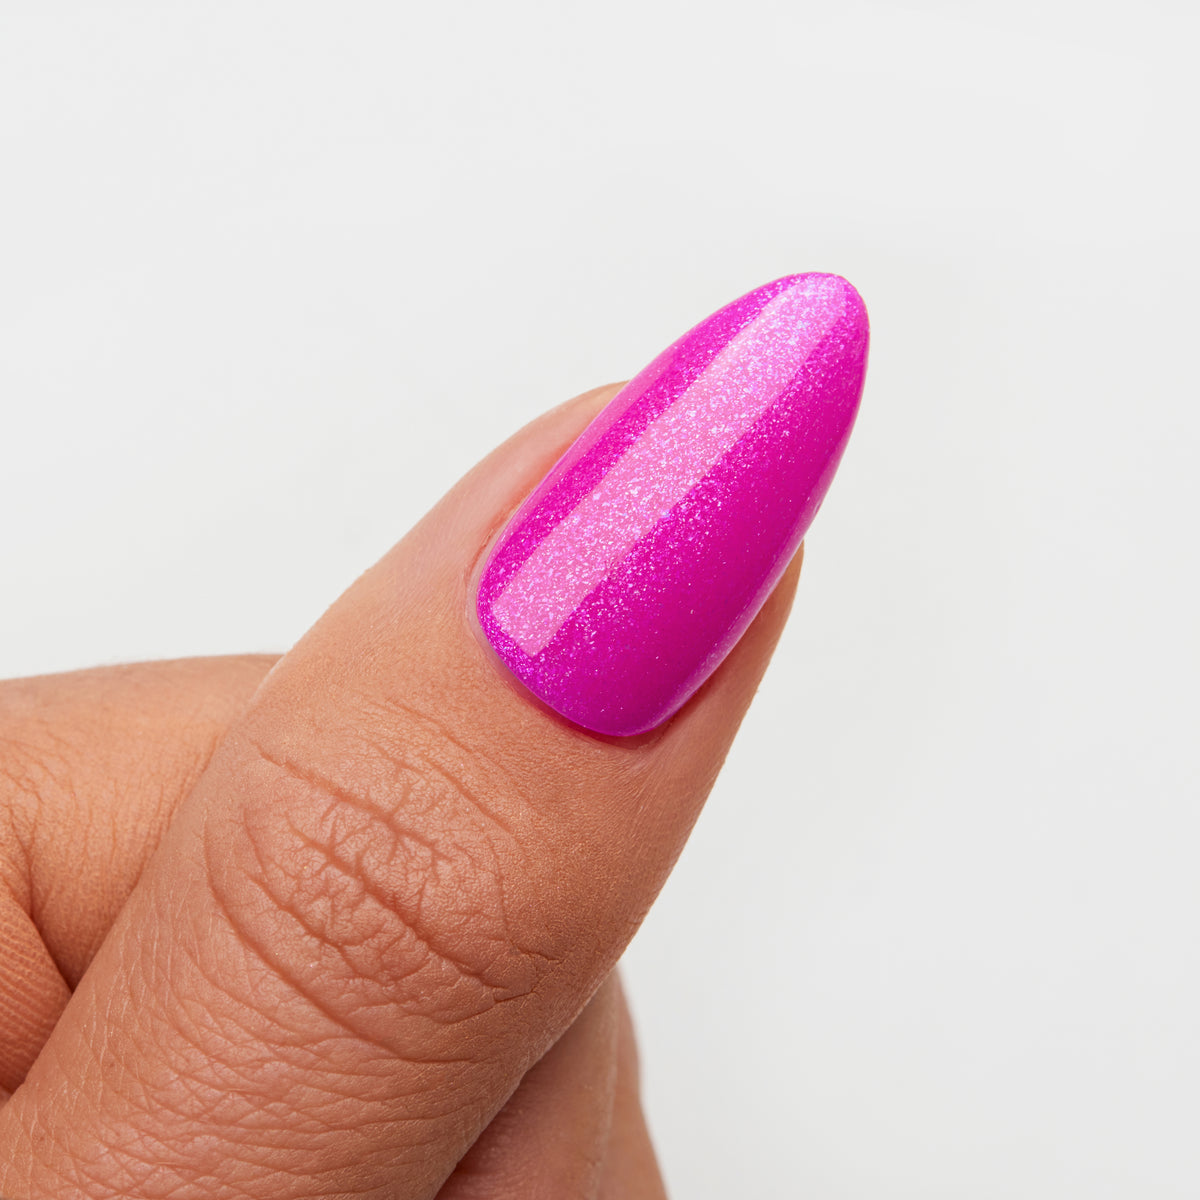 Gelous Back to the Fuchsia gel nail polish swatch - photographed in Australia